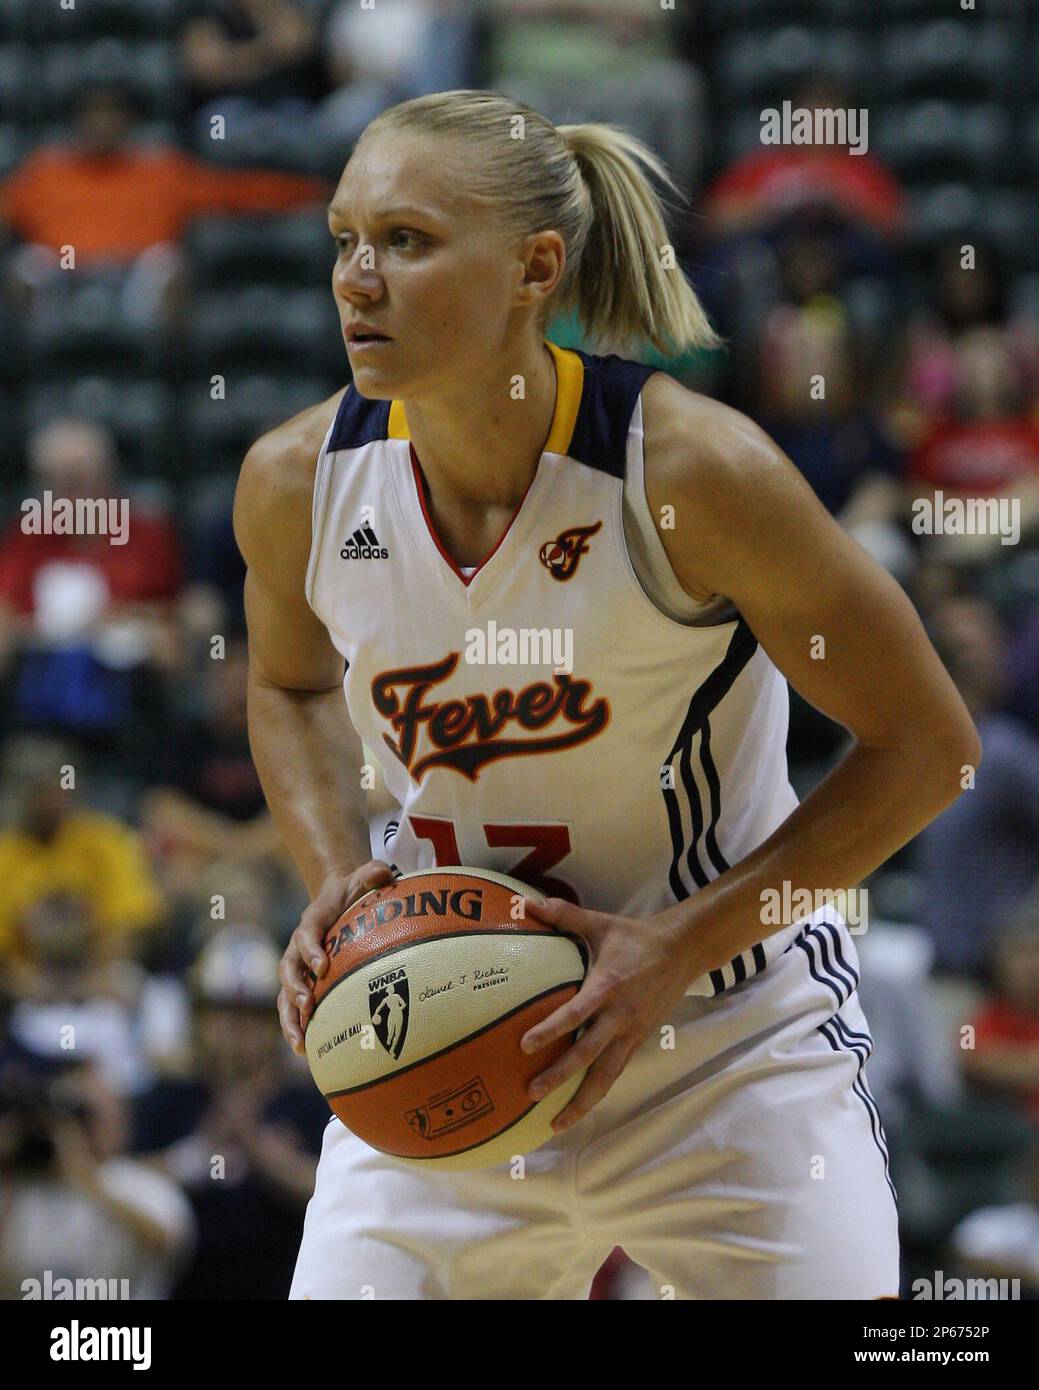 August 28 2012: Indiana Fever guard Erin Phillips (13) sets up the offense during a game between the Washington Mystics and the Indiana Fever at Bankers Life Fieldhouse in Indianapolis, Indiana. (Cal Sport Media via AP Images) Stock Photo